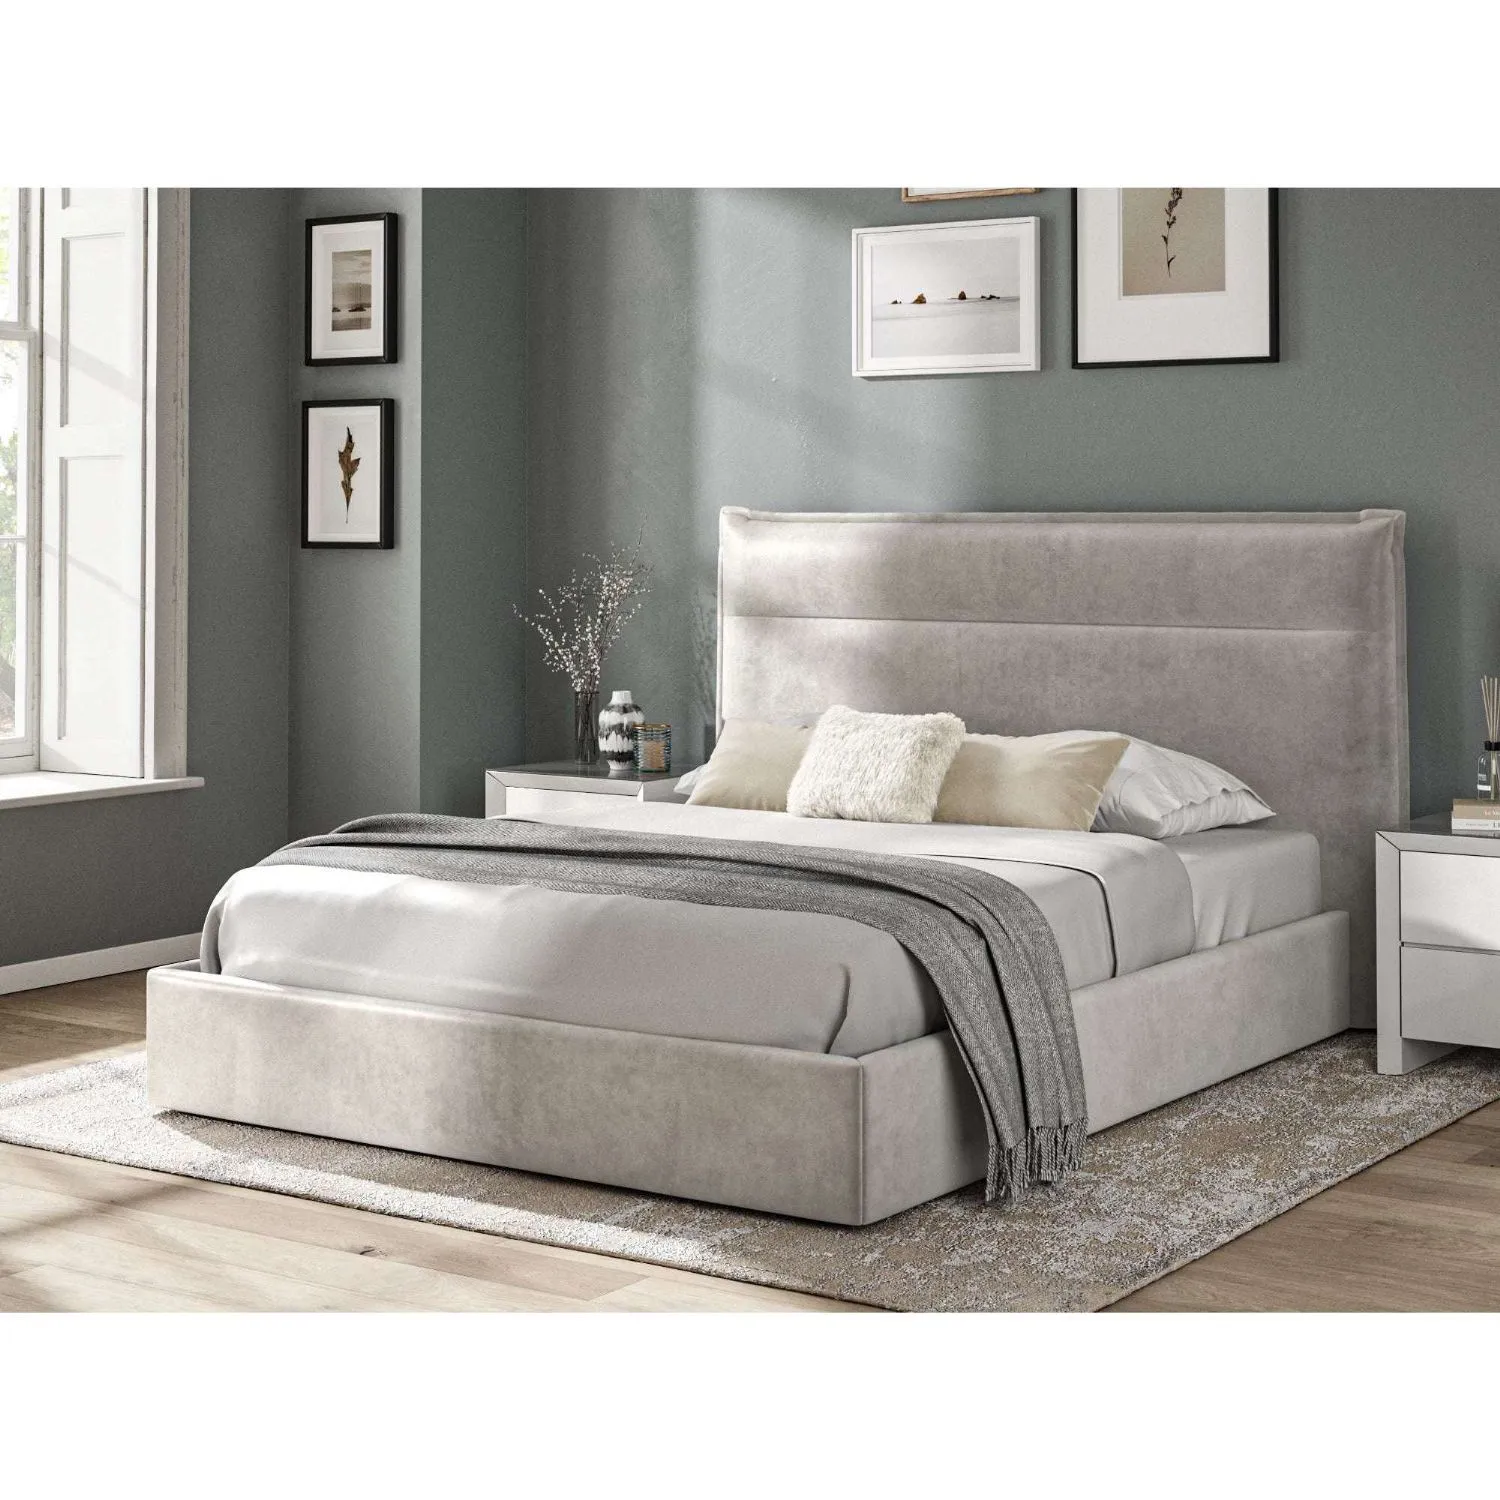 Fabric Bed Collection Silver 5